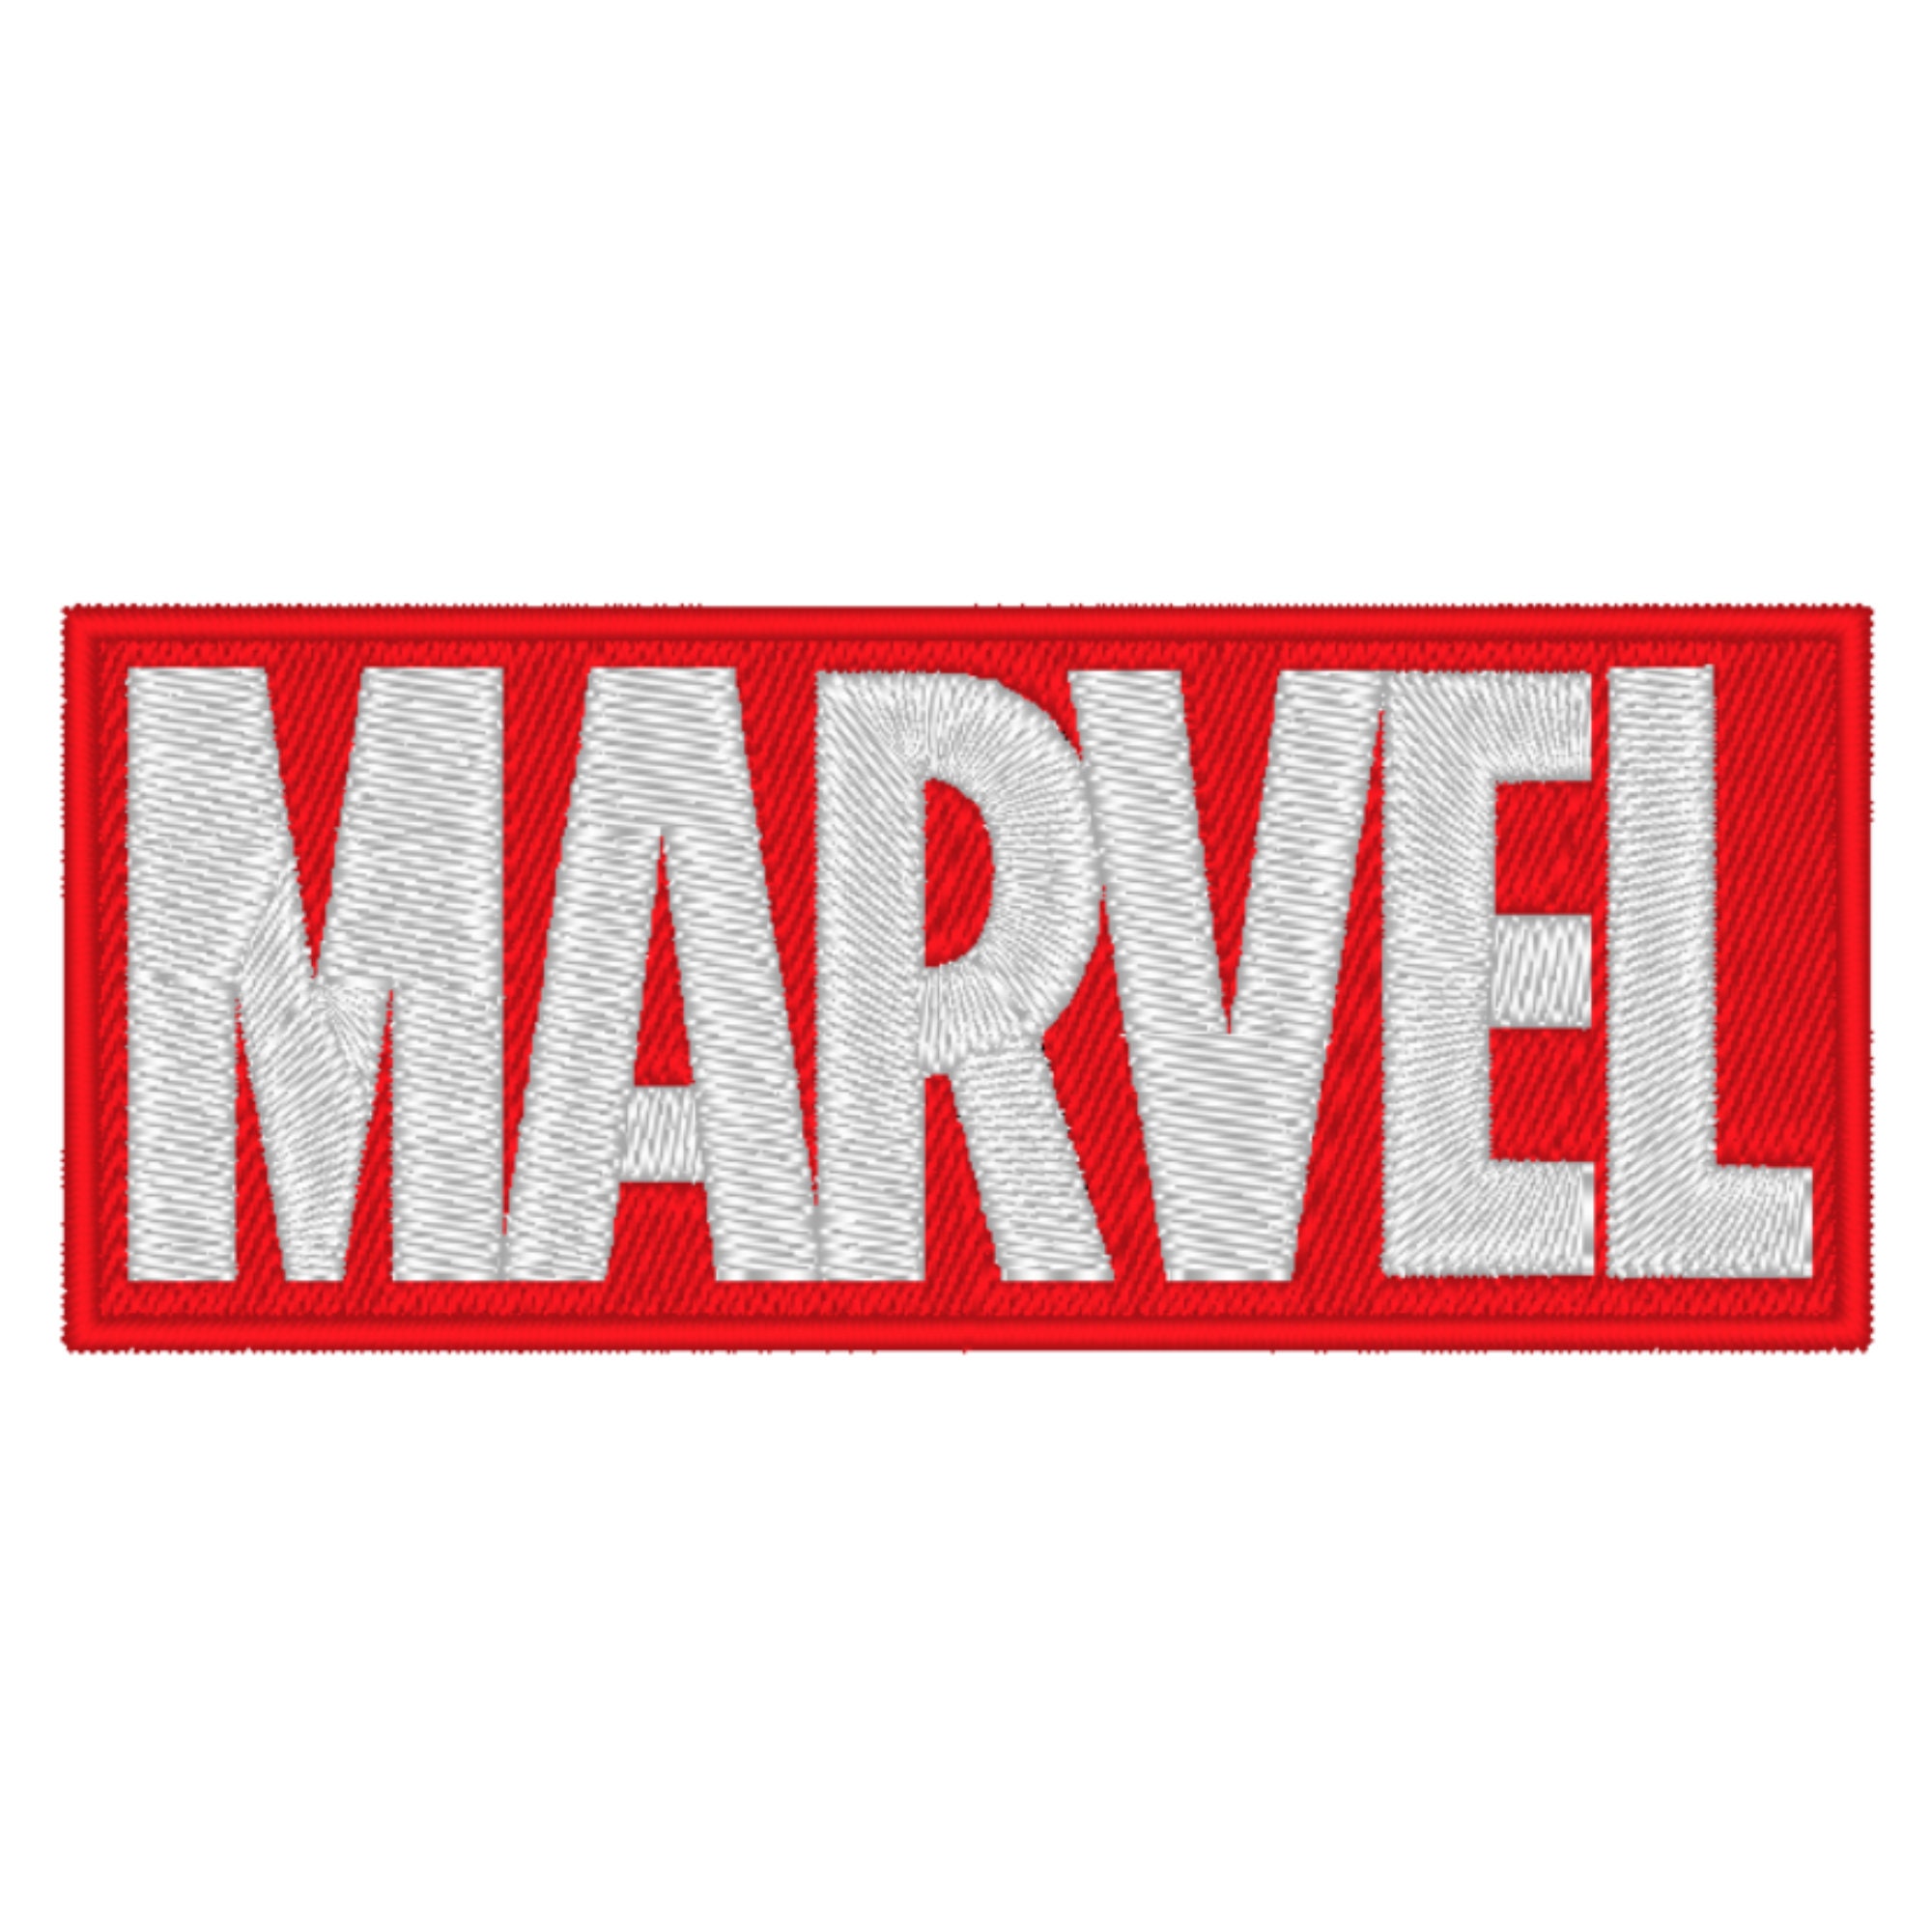 Star Lord Marvel Avengers Patch Design for Machine 